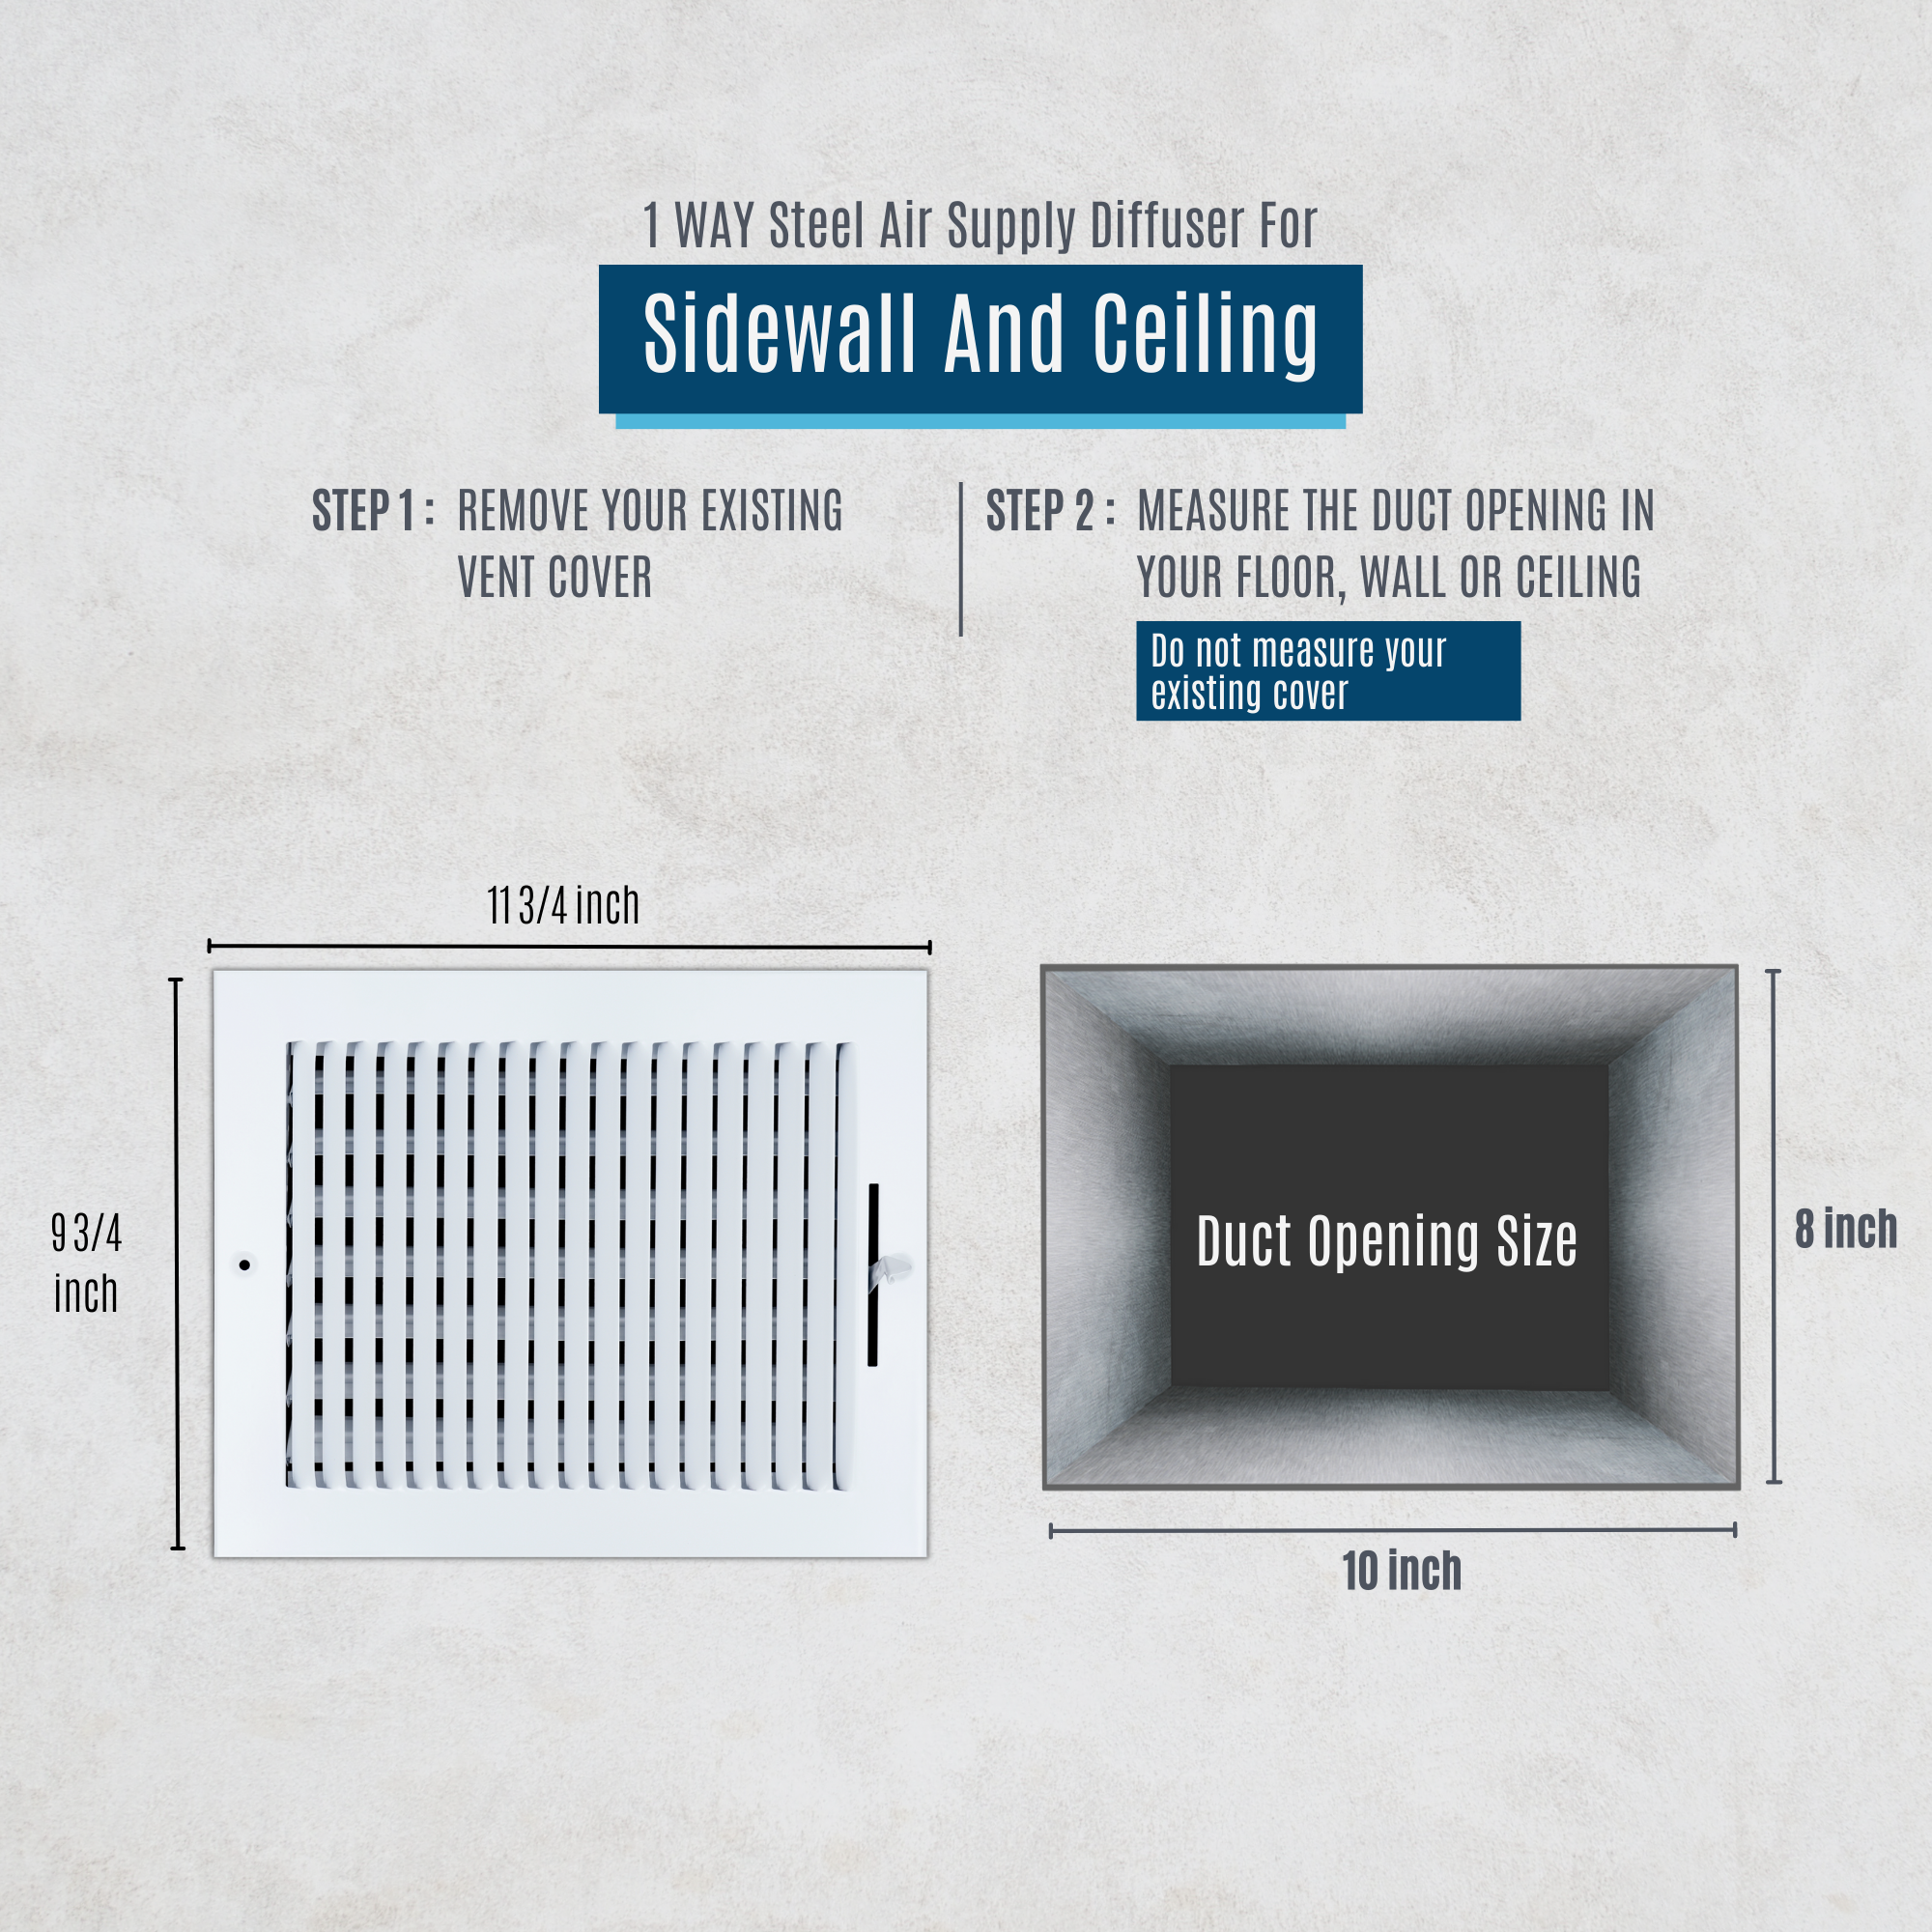 10 X 8 Duct Opening | 1 WAY Steel Air Supply Diffuser for Sidewall and Ceiling